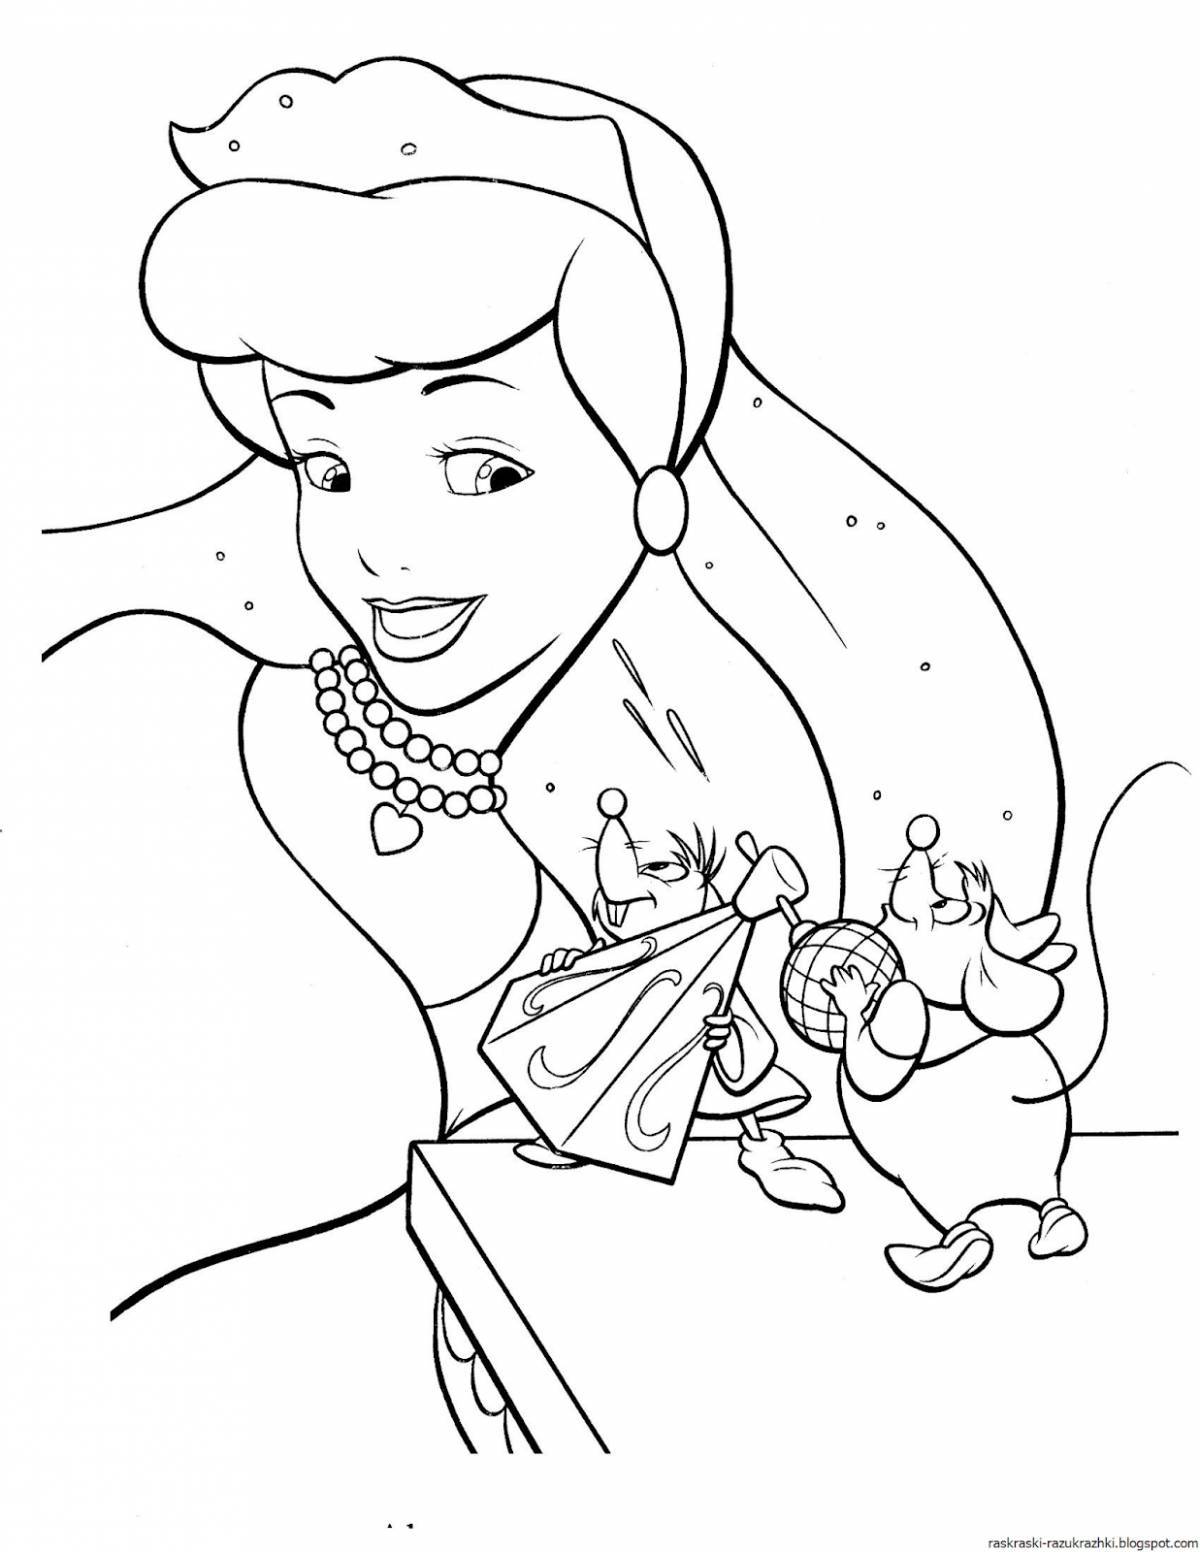 Cinderella holiday coloring book for kids